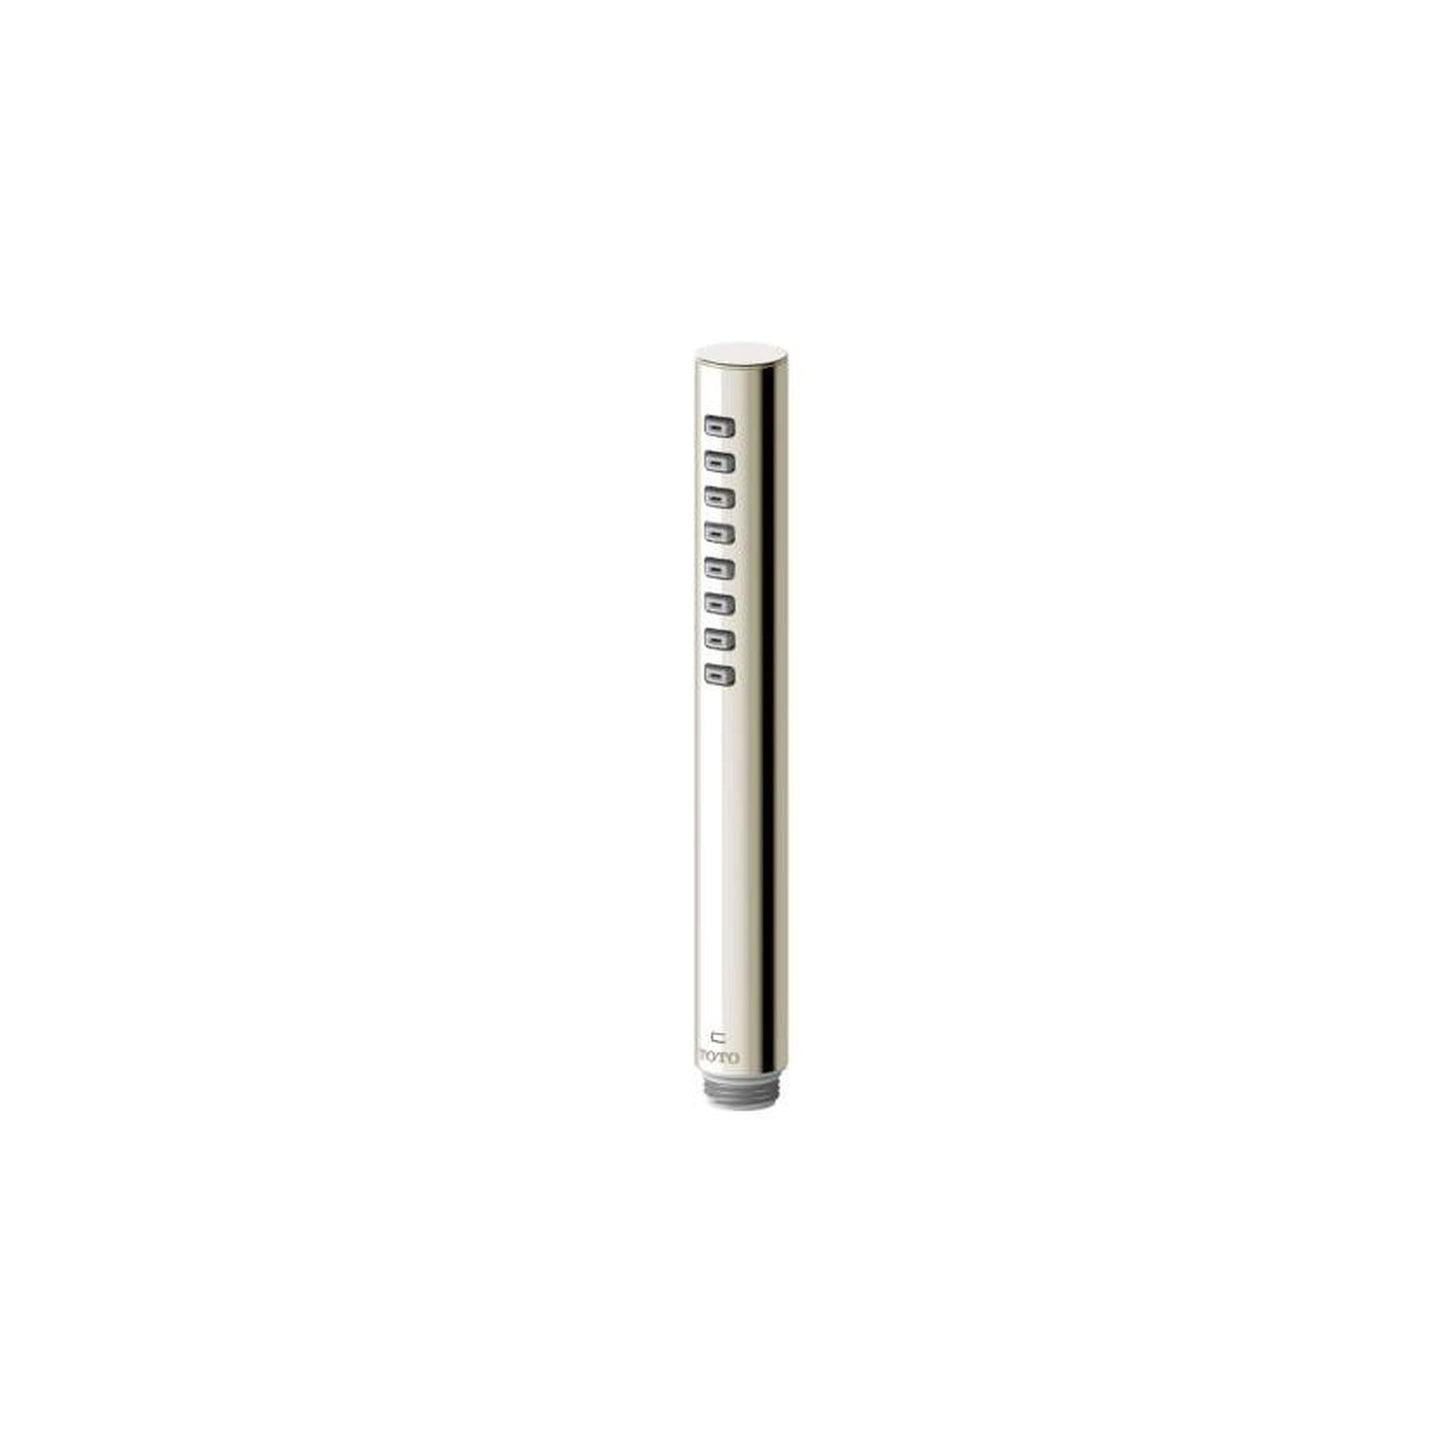 Toto Hs,1MODE,1.75GPM,G,Cylindrical Polished Nickel